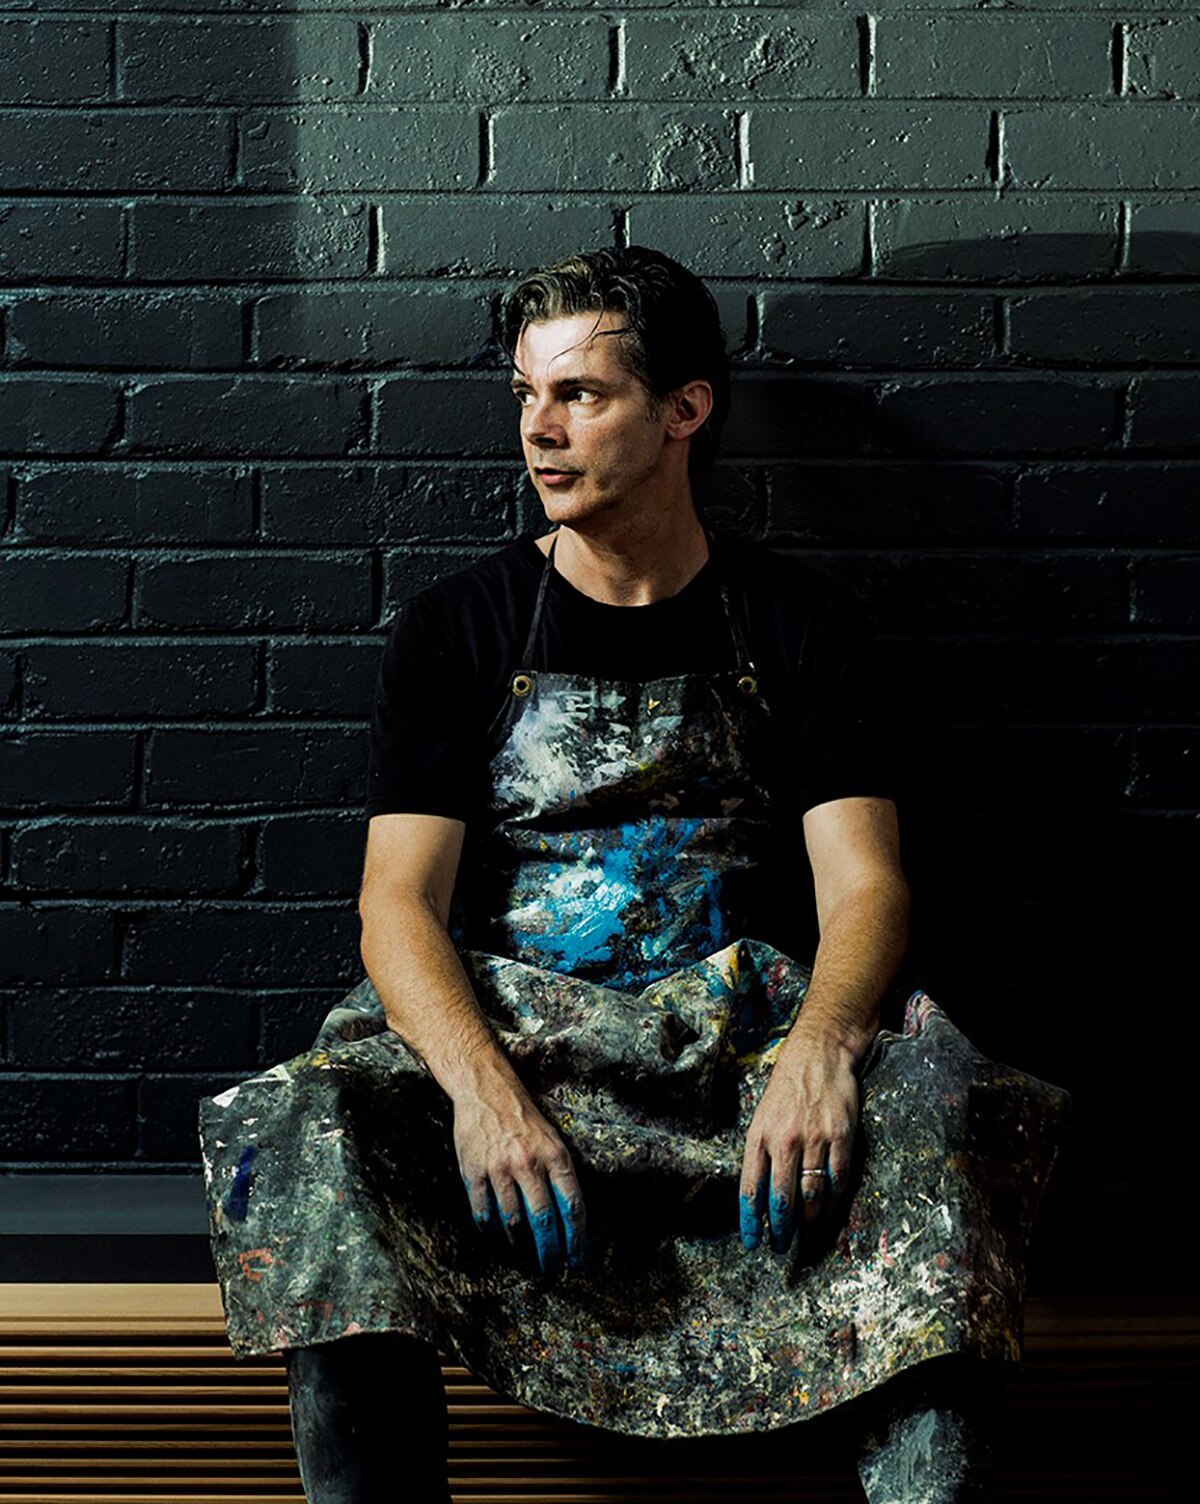 Colour photograph of Paint-maker and author David Coles wearing a paint smattered apron and sitting against a black wall.